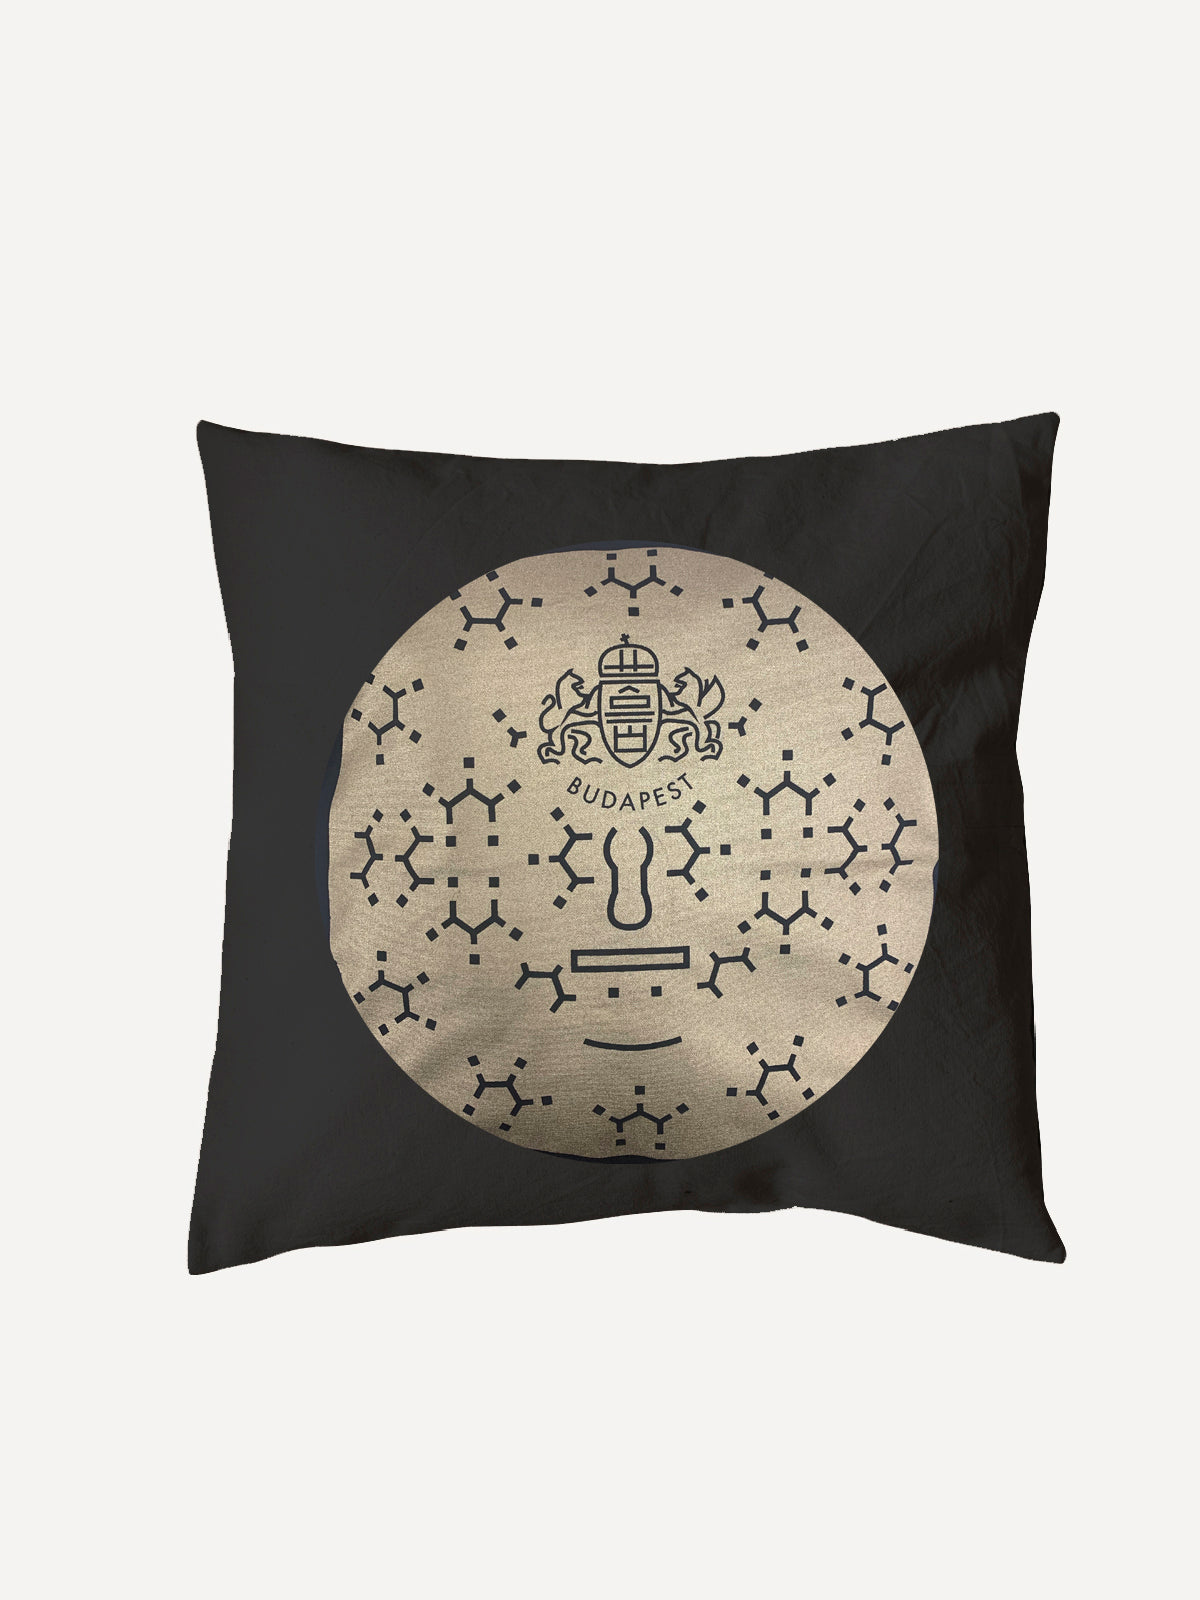 Black cushion cover with a golden channel cover pattern